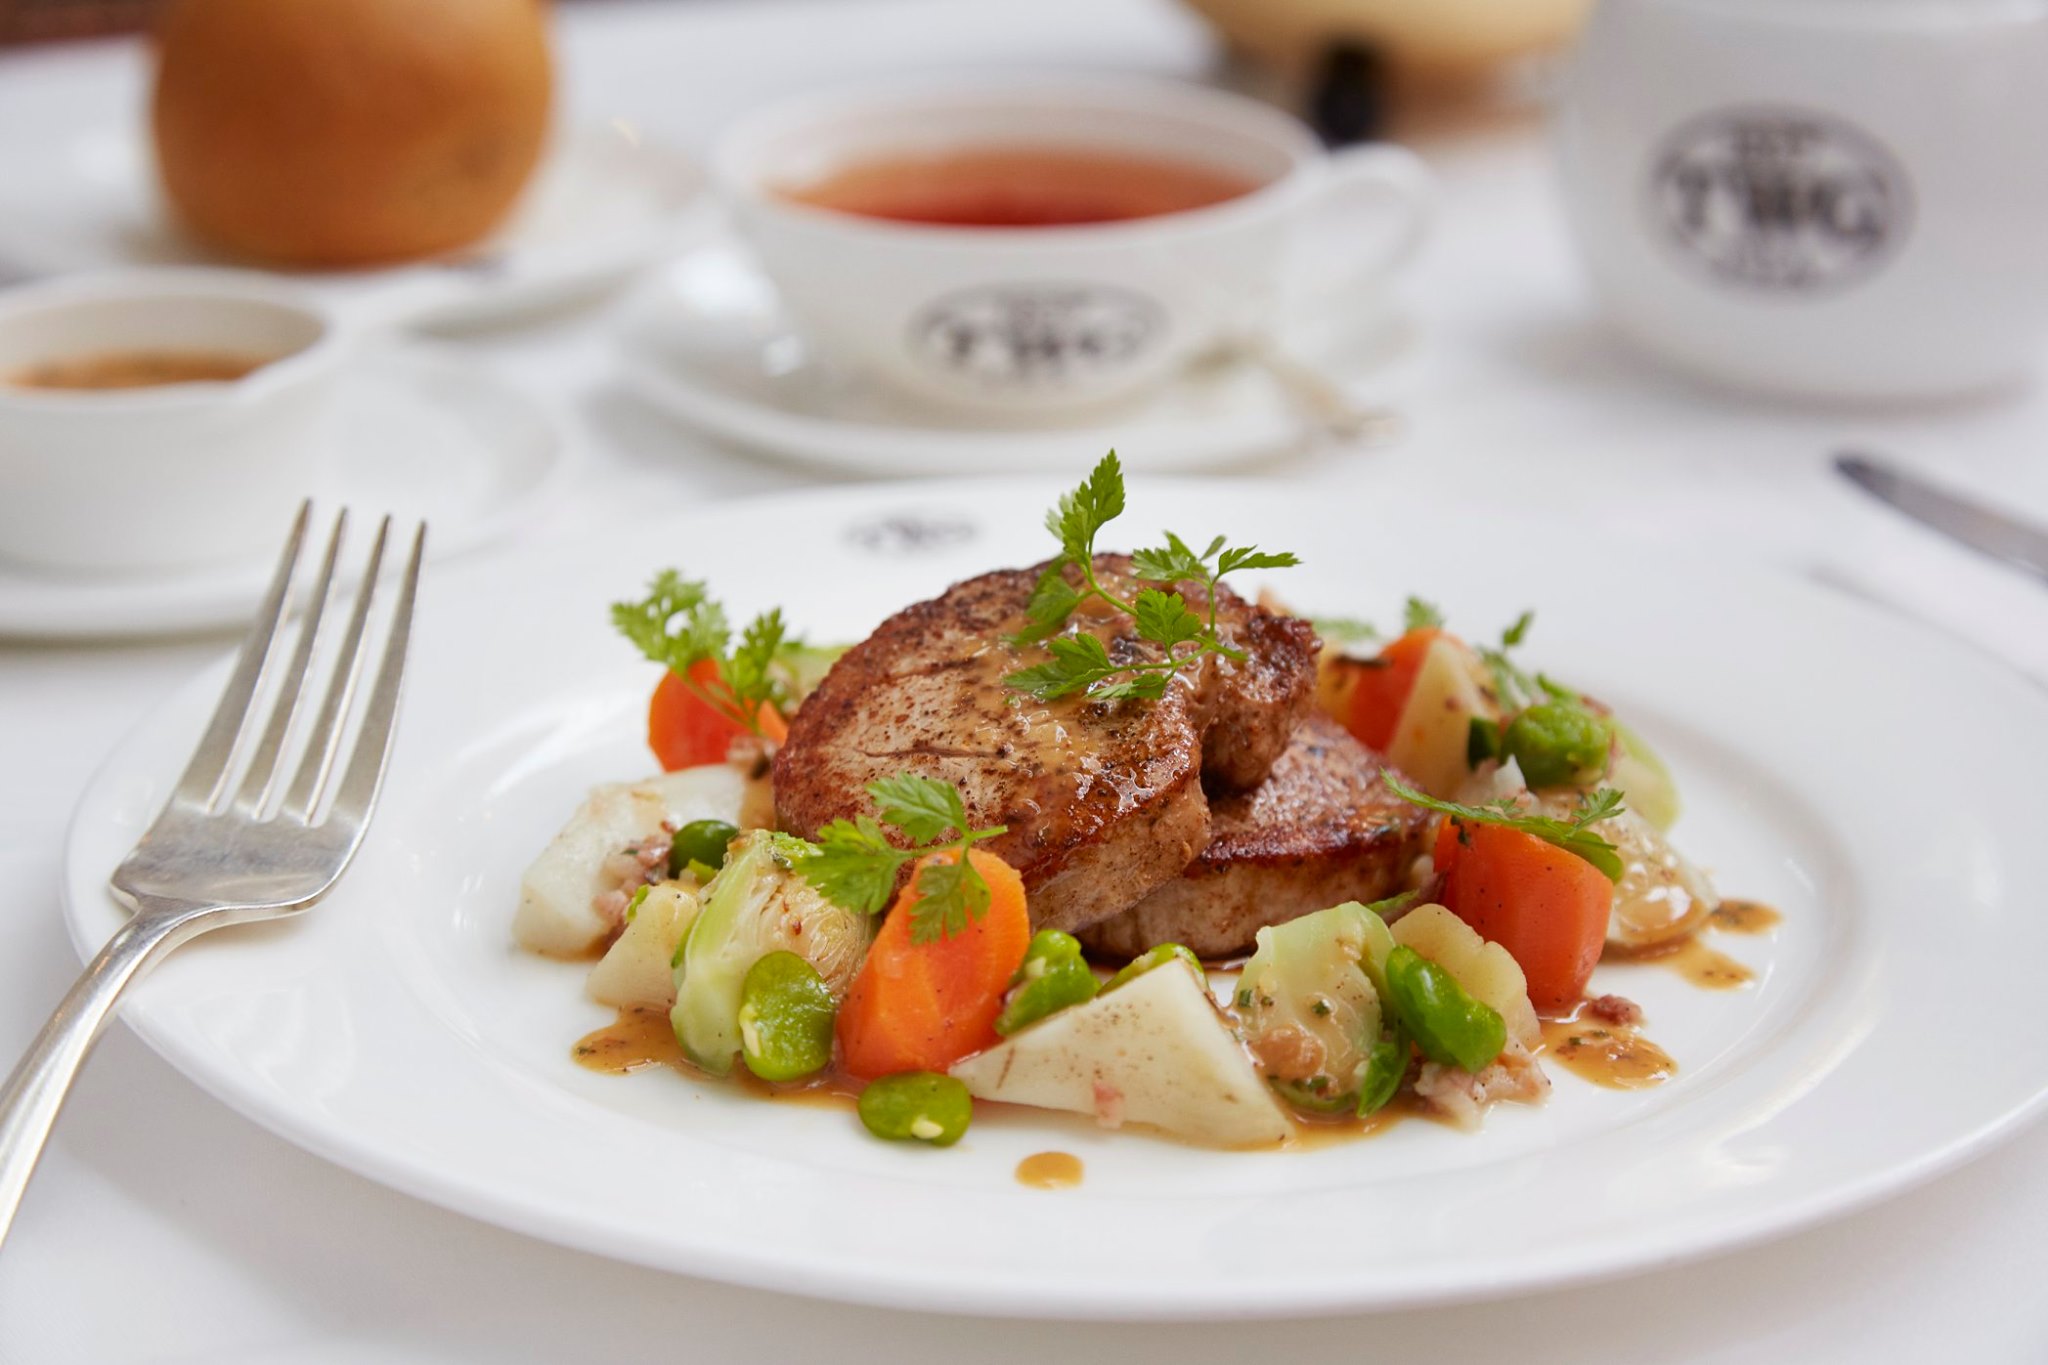 On this week's set menu, pan-seared veal medallion accompanied by parsnip, Jerusalem artichoke, Brussels sprouts, baby carrots, broad beans and veal bacon, served with a White Gold Tea infused apple cream sauce. Available at all TWG Tea Salons in Singapore.